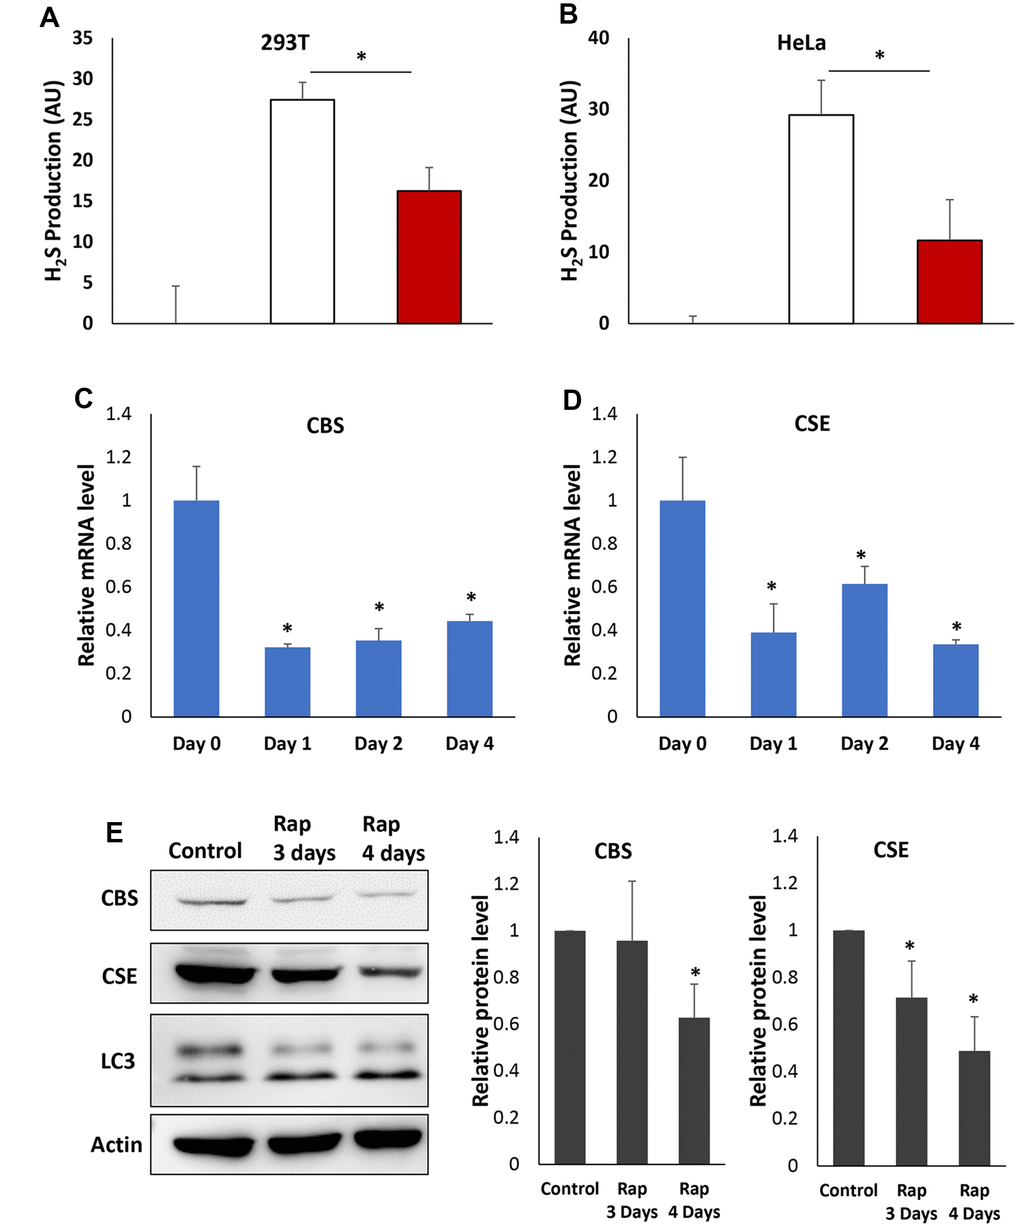 Rapamycin inhibits H2S production and expression of CBS and CGL in human cells. (A and B) H2S production was monitored in the presence or absence of Cys, PLP and rapamycin as indicated in 293T (A) or HeLa (B) cell. (C and D) Relative mRNA levels of CBS (C) or CGL (D) in HeLa cell treated with rapamycin for indicated times. Expression levels of β-actin mRNA were used as internal controls. (E). Western-blotting detection of CBS and CGL protein in HeLa cell treated with rapamycin for indicated times (Left). LC3 was also monitored to verify that the autophagy was induced by rapamycin. Quantification of CBS and CGL protein levels was based on Western blots and normalized to respective β-actin levels (Middle and Right). (* p